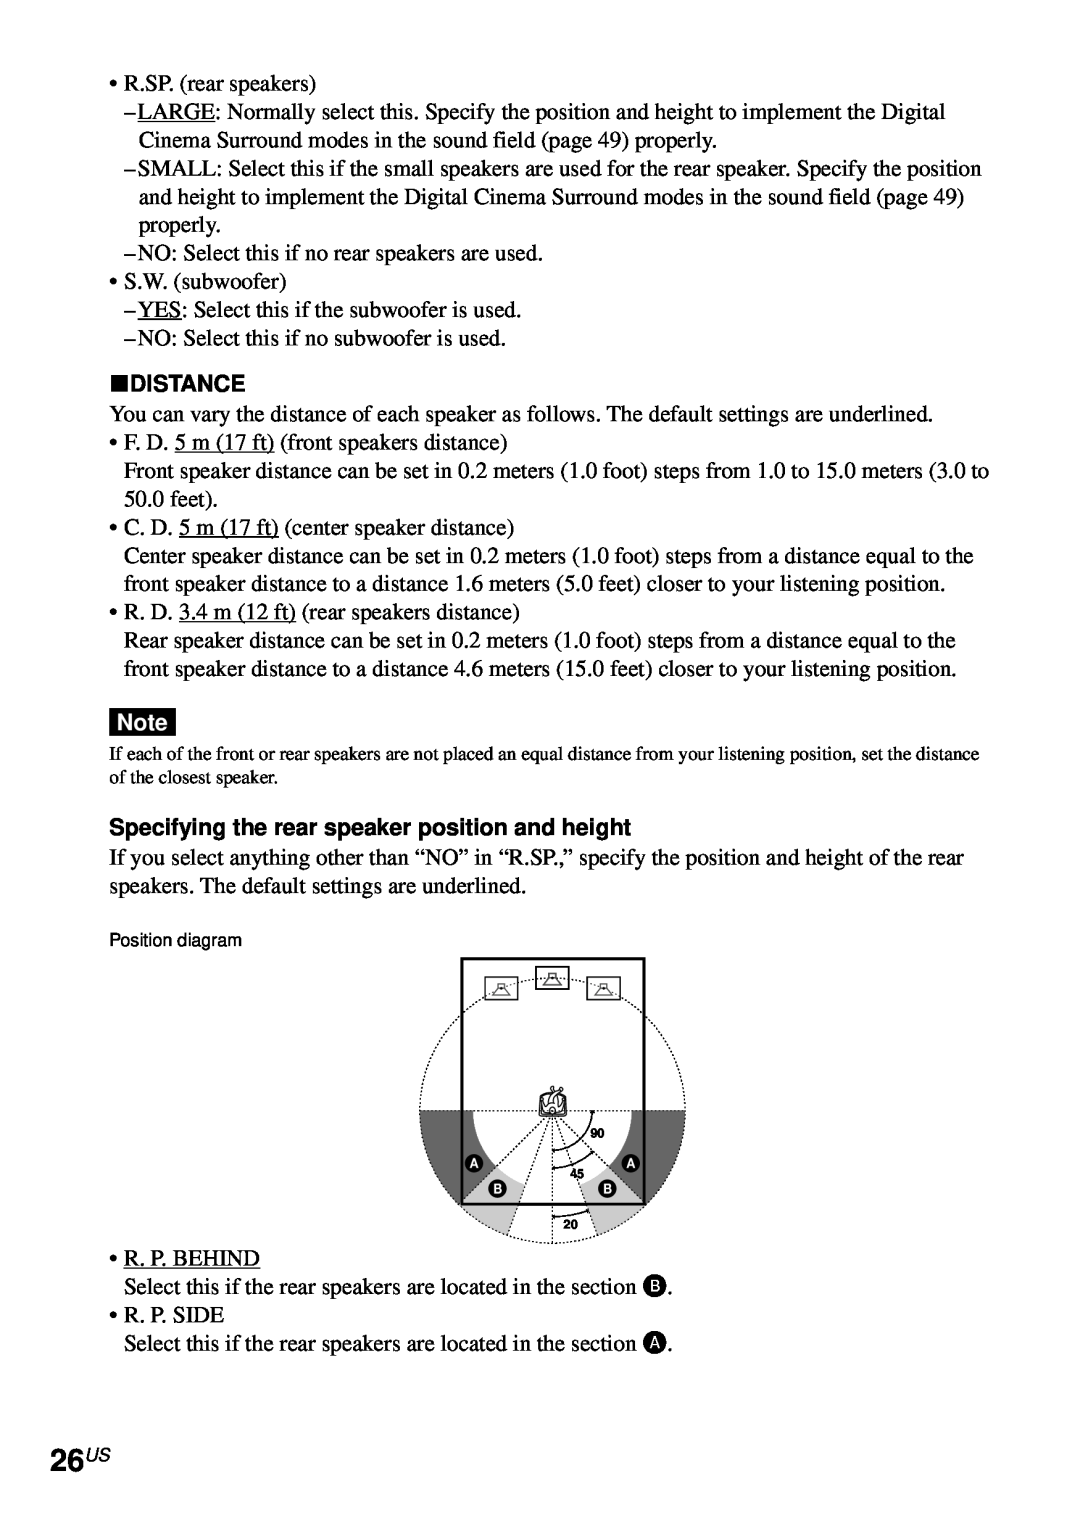 Sony AVD-S50ES operating instructions 26US, xDISTANCE, Specifying the rear speaker position and height 